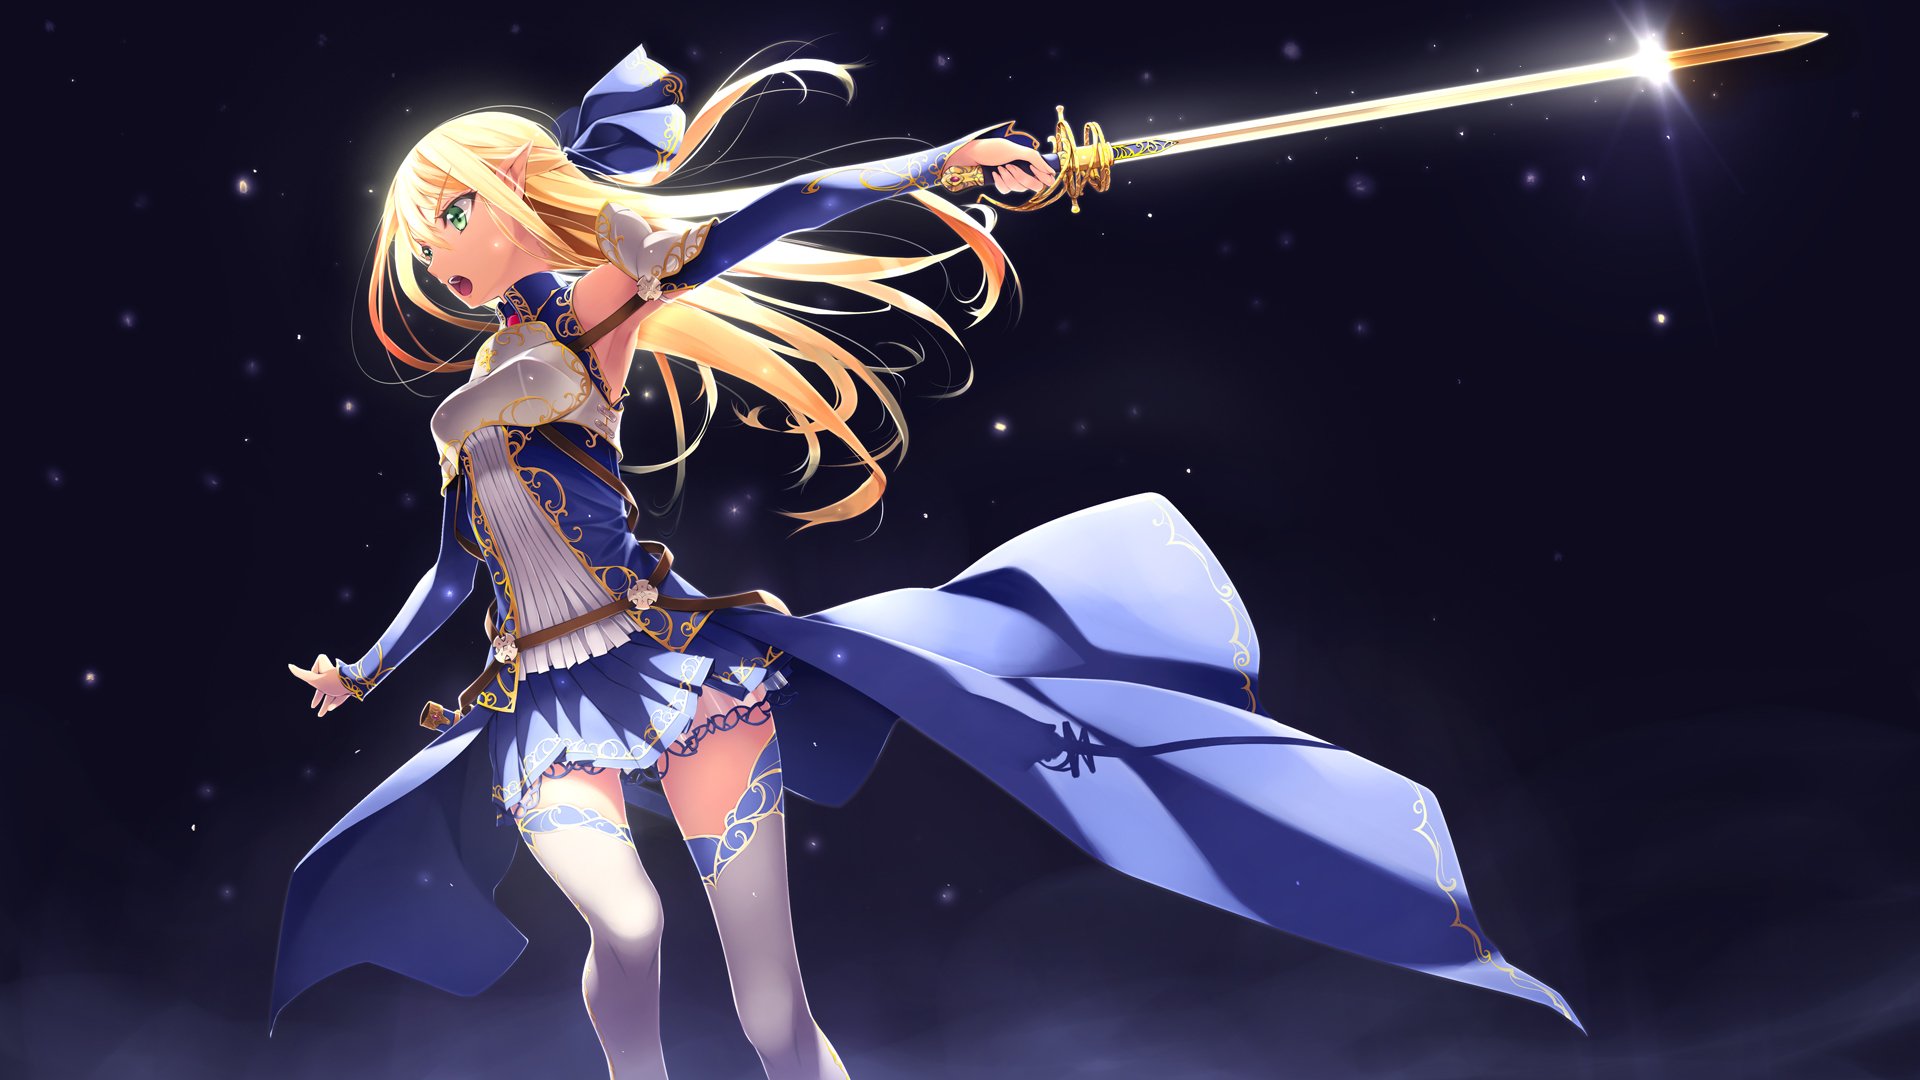 Blonde Anime Girl With Sword - HD Wallpaper 